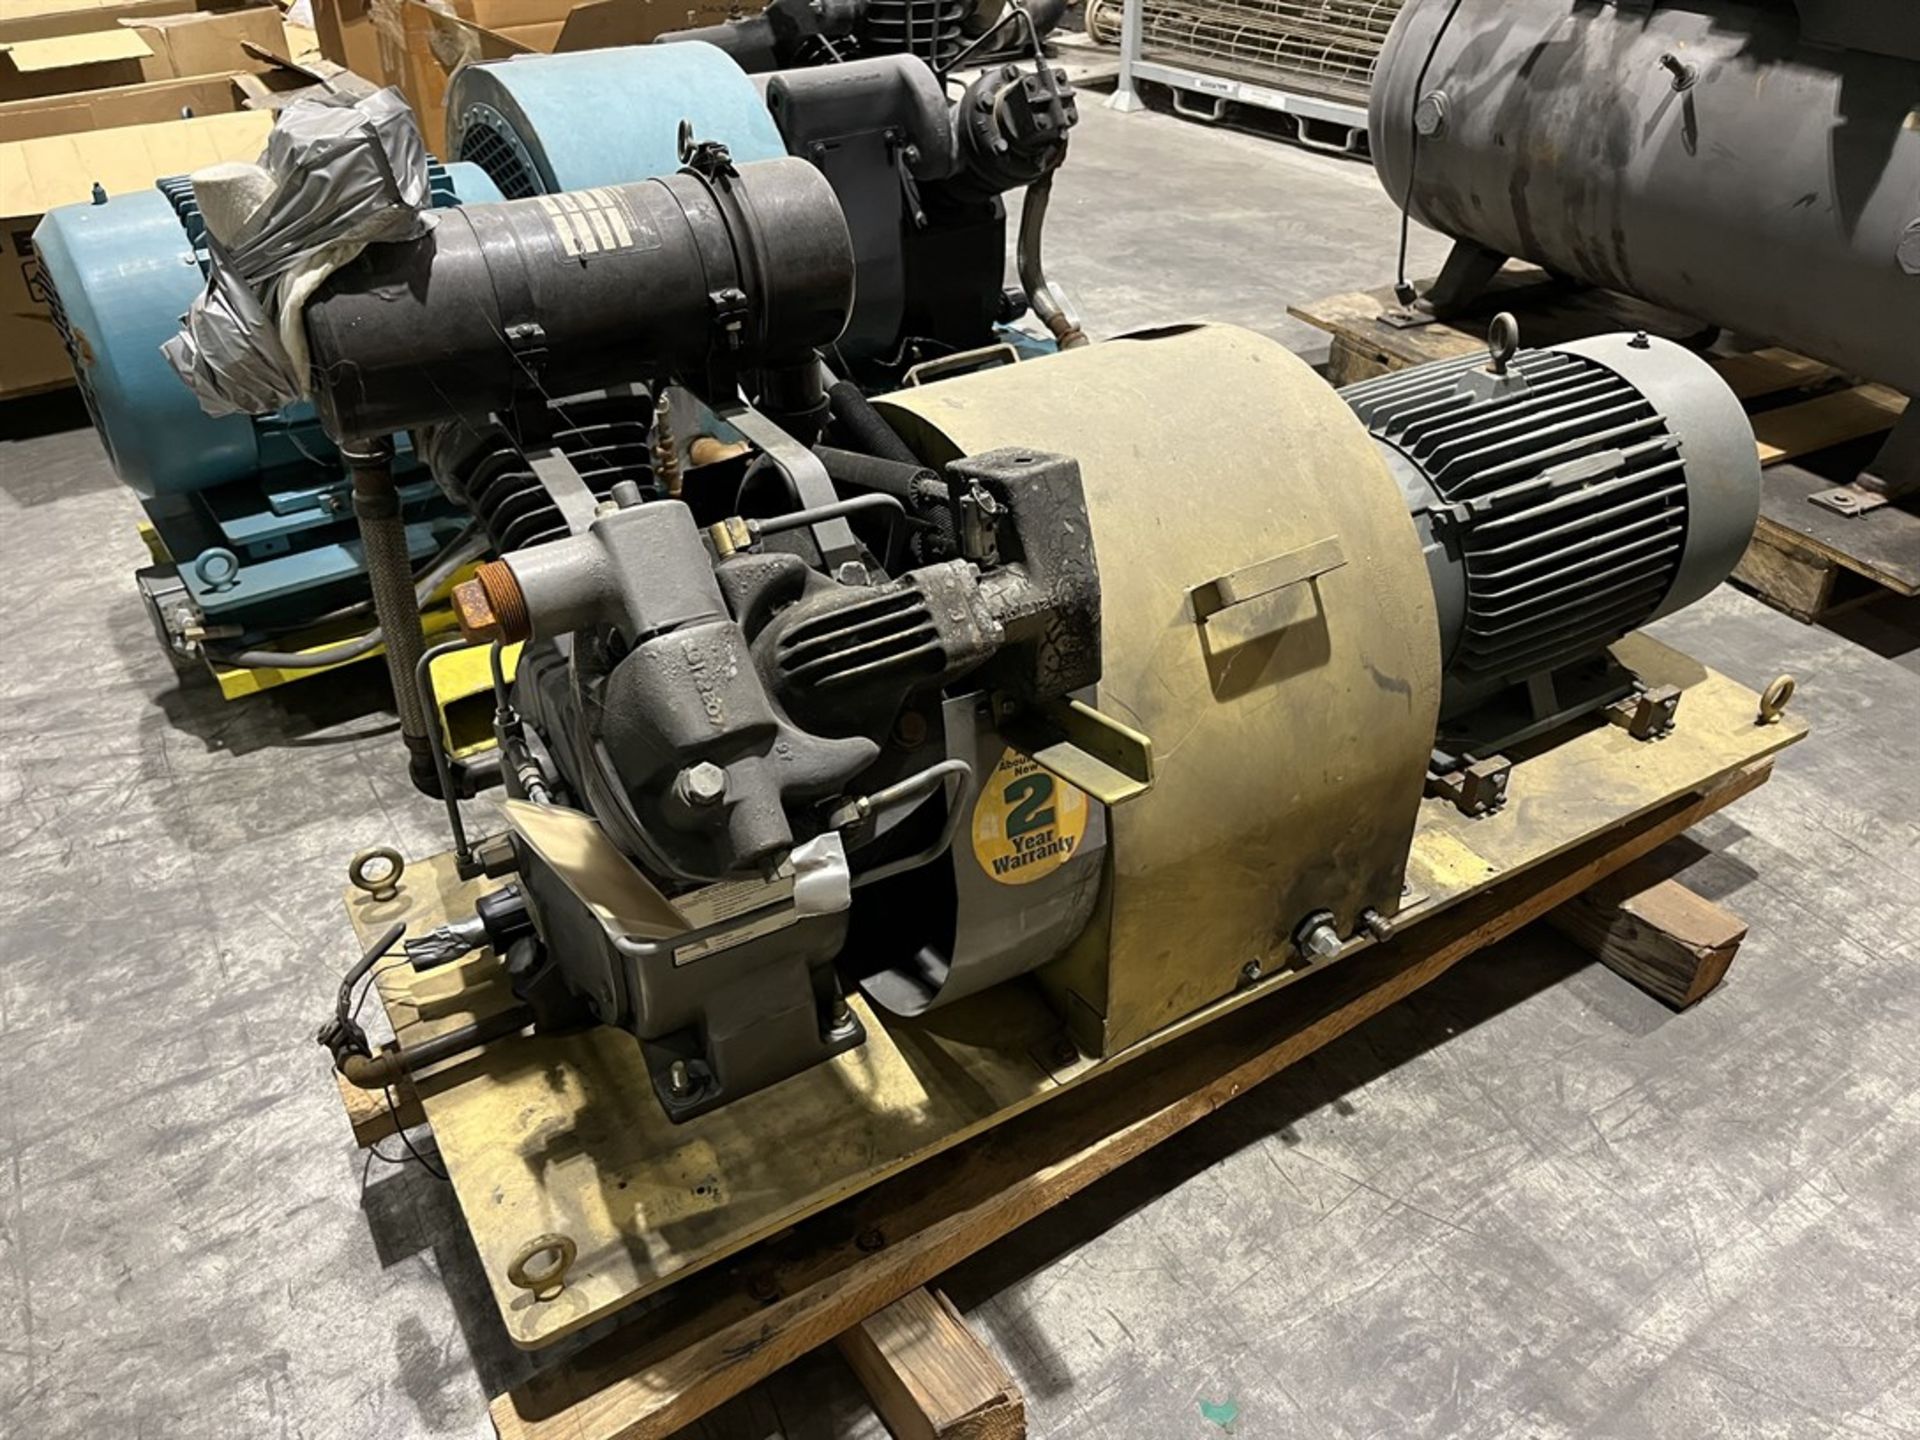 INGERSOLL RAND 7100 Air Compressor, s/n 30T 758971 - Image 2 of 4